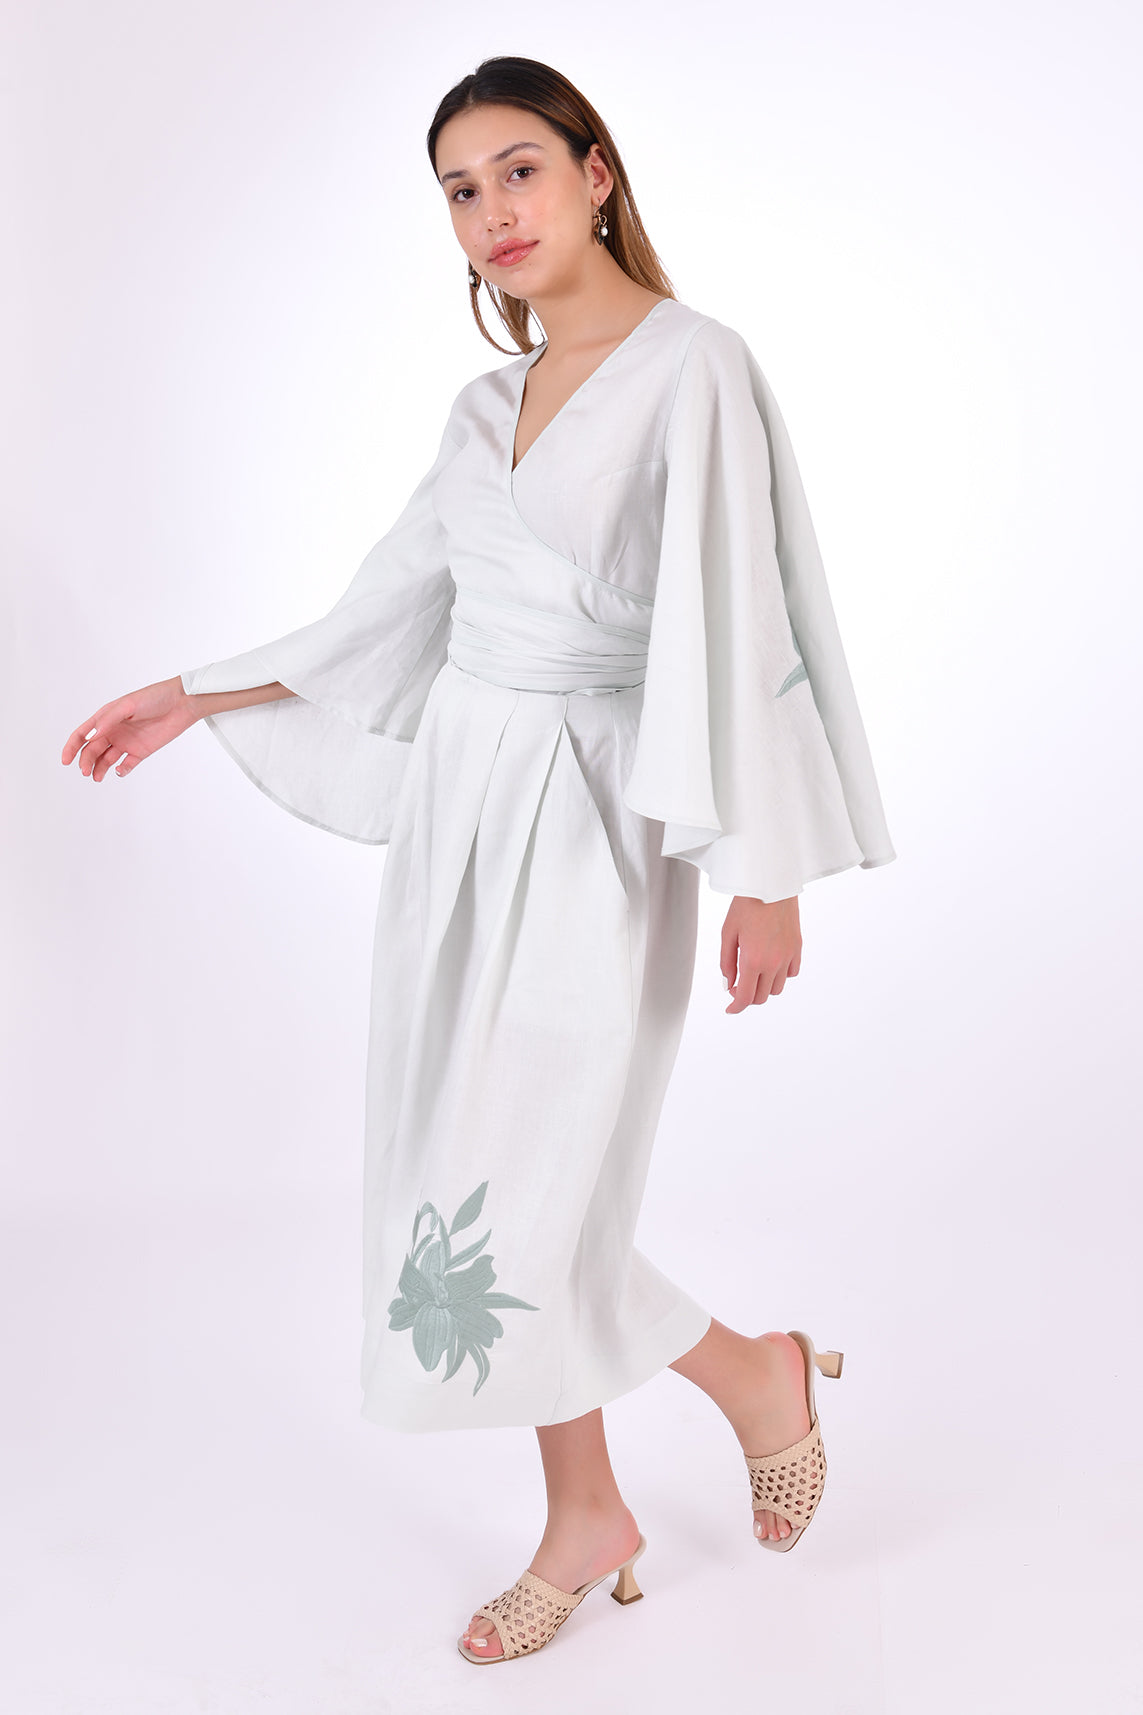 Fanm Mon Des-Vu Linen Shorts Set (Side View). 2-Piece Linen Shorts &amp; Top Set. Featuring a wrap top with wide long sleeves and long pleated shorts with embroidery.